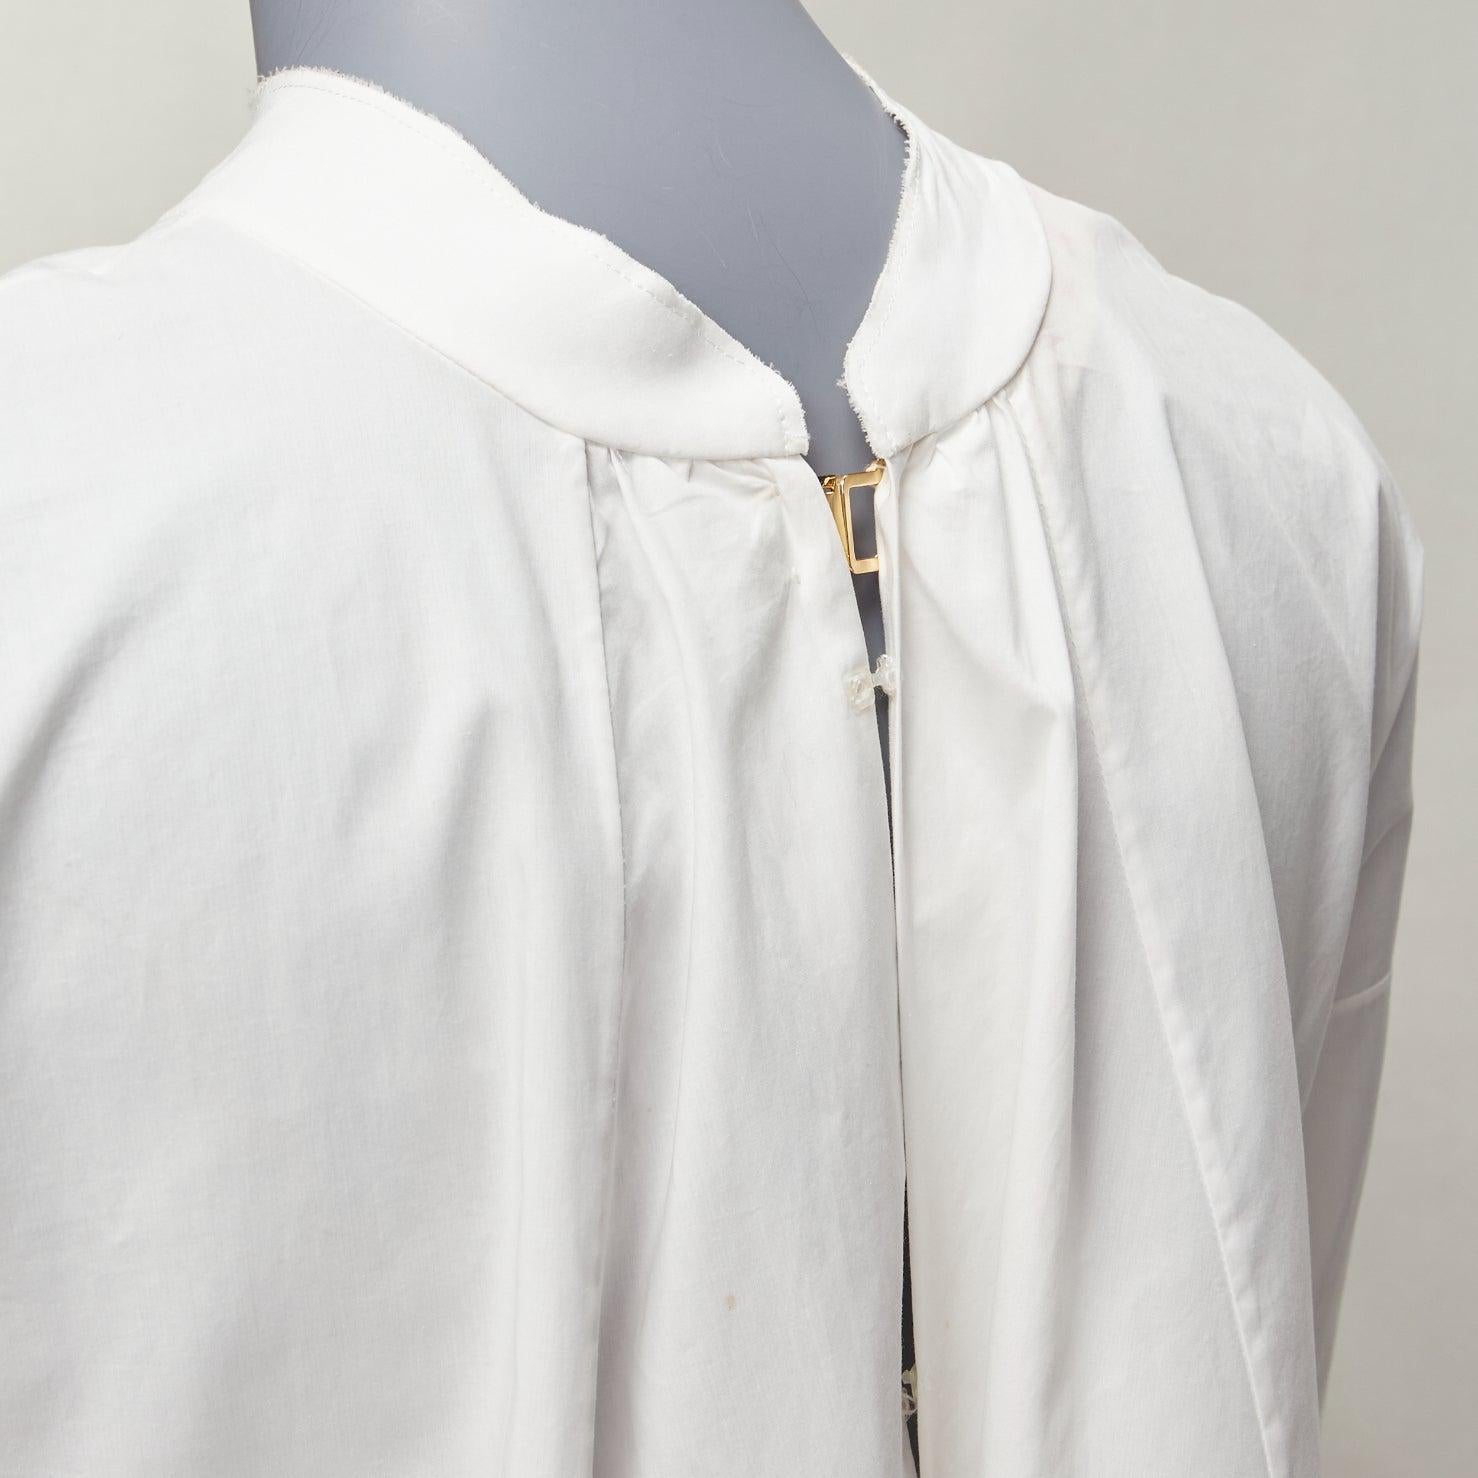 MARNI white cotton minimal front gold hook back panelled white shirt
Reference: NKLL/A00170
Brand: Marni
Material: Feels like cotton
Color: White, Gold
Pattern: Solid
Closure: Hook & Bar
Extra Details: Hook and bar back